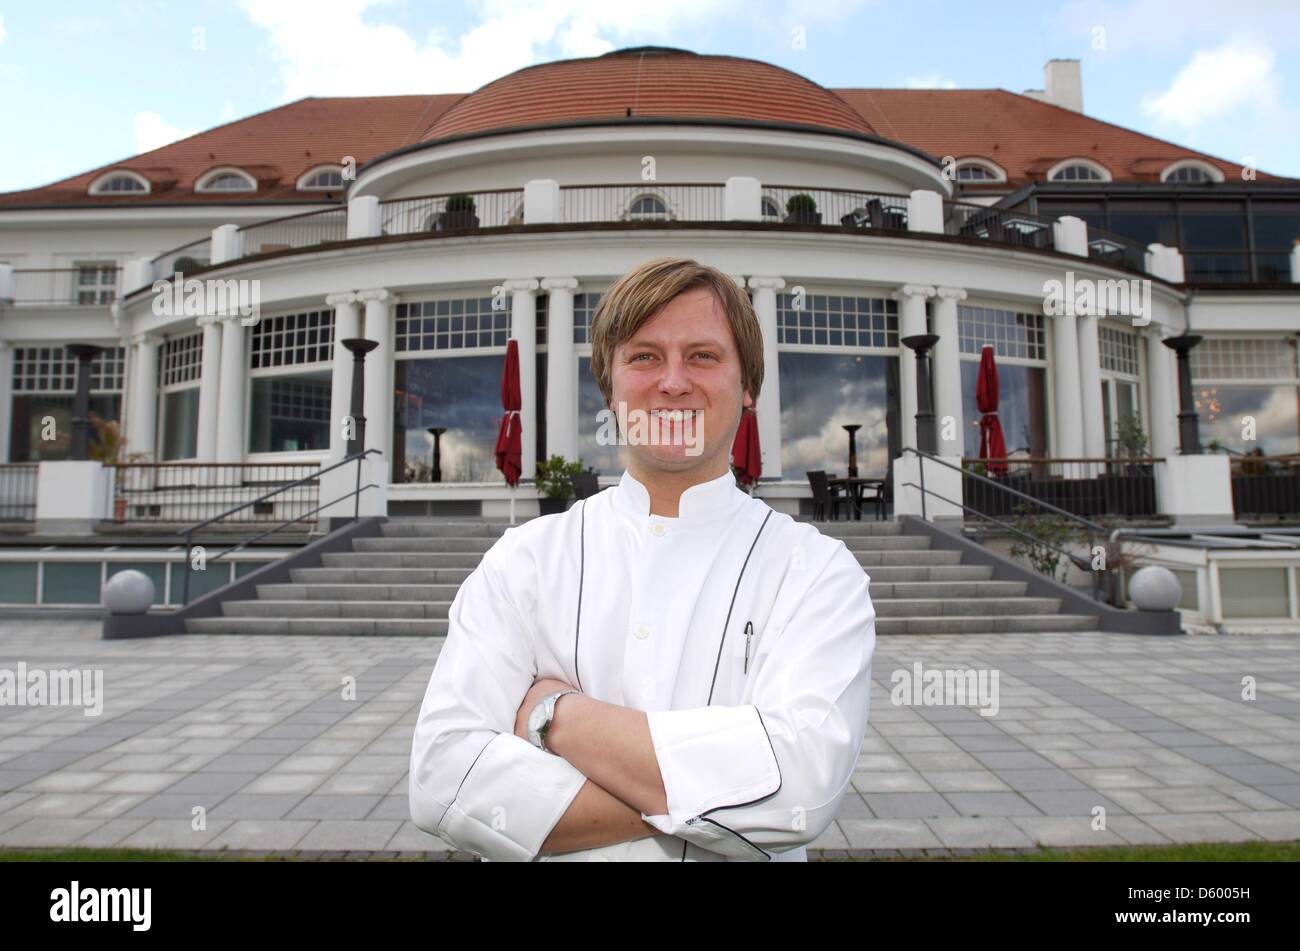 FILE - An archive picture dated 14 November 2007 shows chef Kevin Fehling standing in front of his gourmet restaurant 'La Belle Epoque' of Hotel Columbia in Travemuende, Germany, 14 November 2012. Restaurant guide 'Michelin' has awarded Fehling its third star on 07 November 2012. Fehling's restaurant is only the tenth to be awarded three stars in Germany. Photo: Wolfgang Langenstra Stock Photo